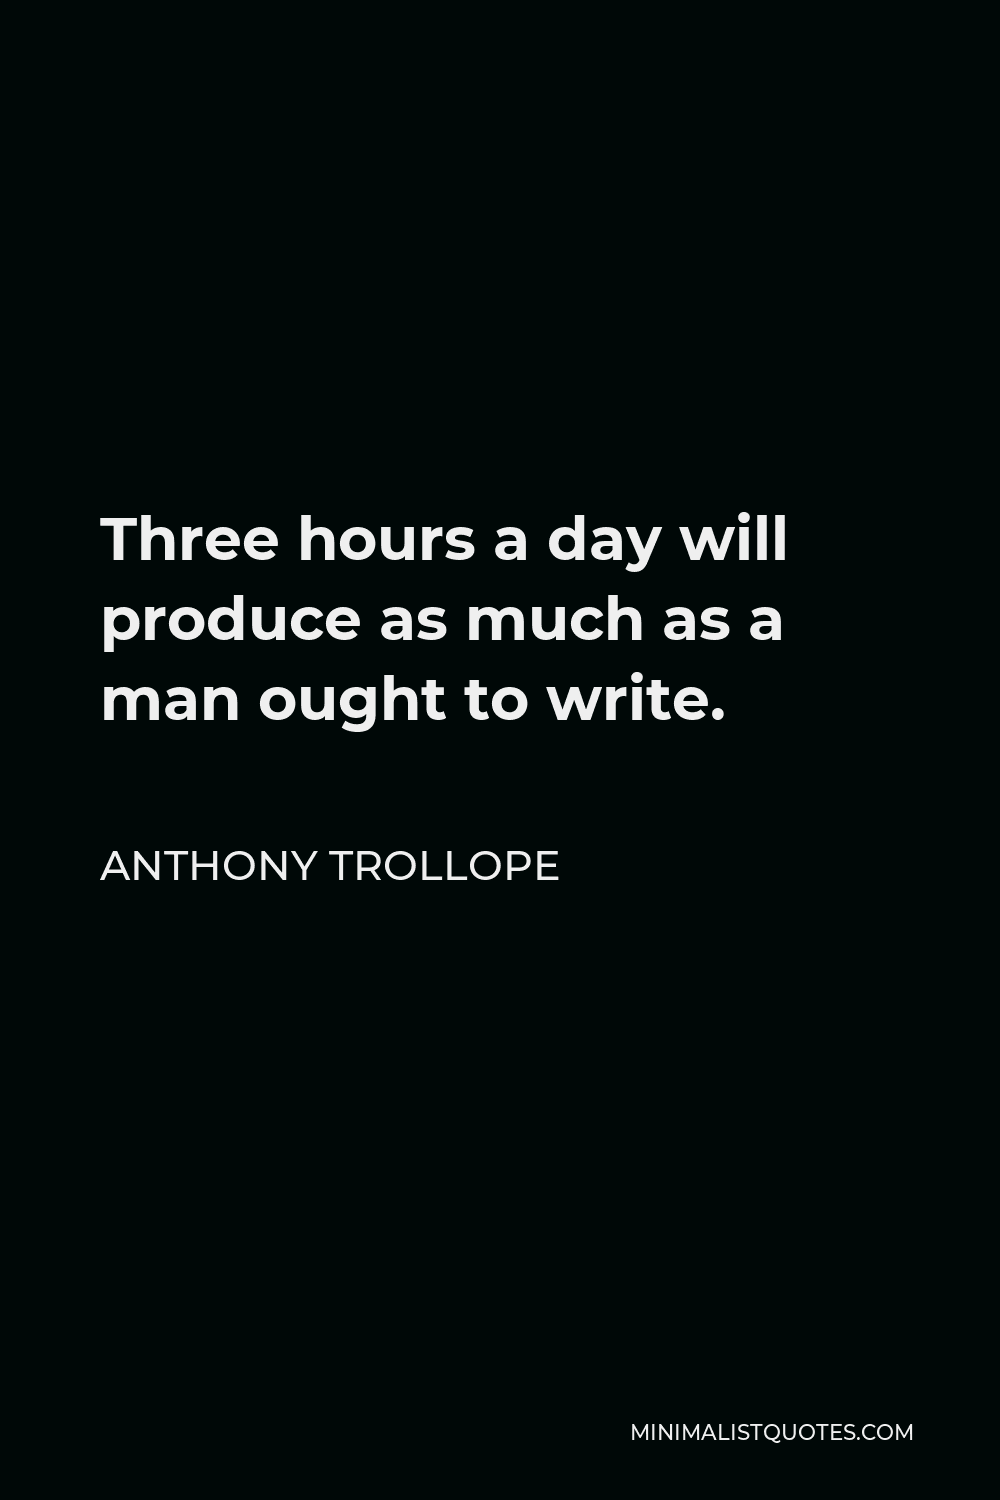 Anthony Trollope Quote - Three hours a day will produce as much as a man ought to write.